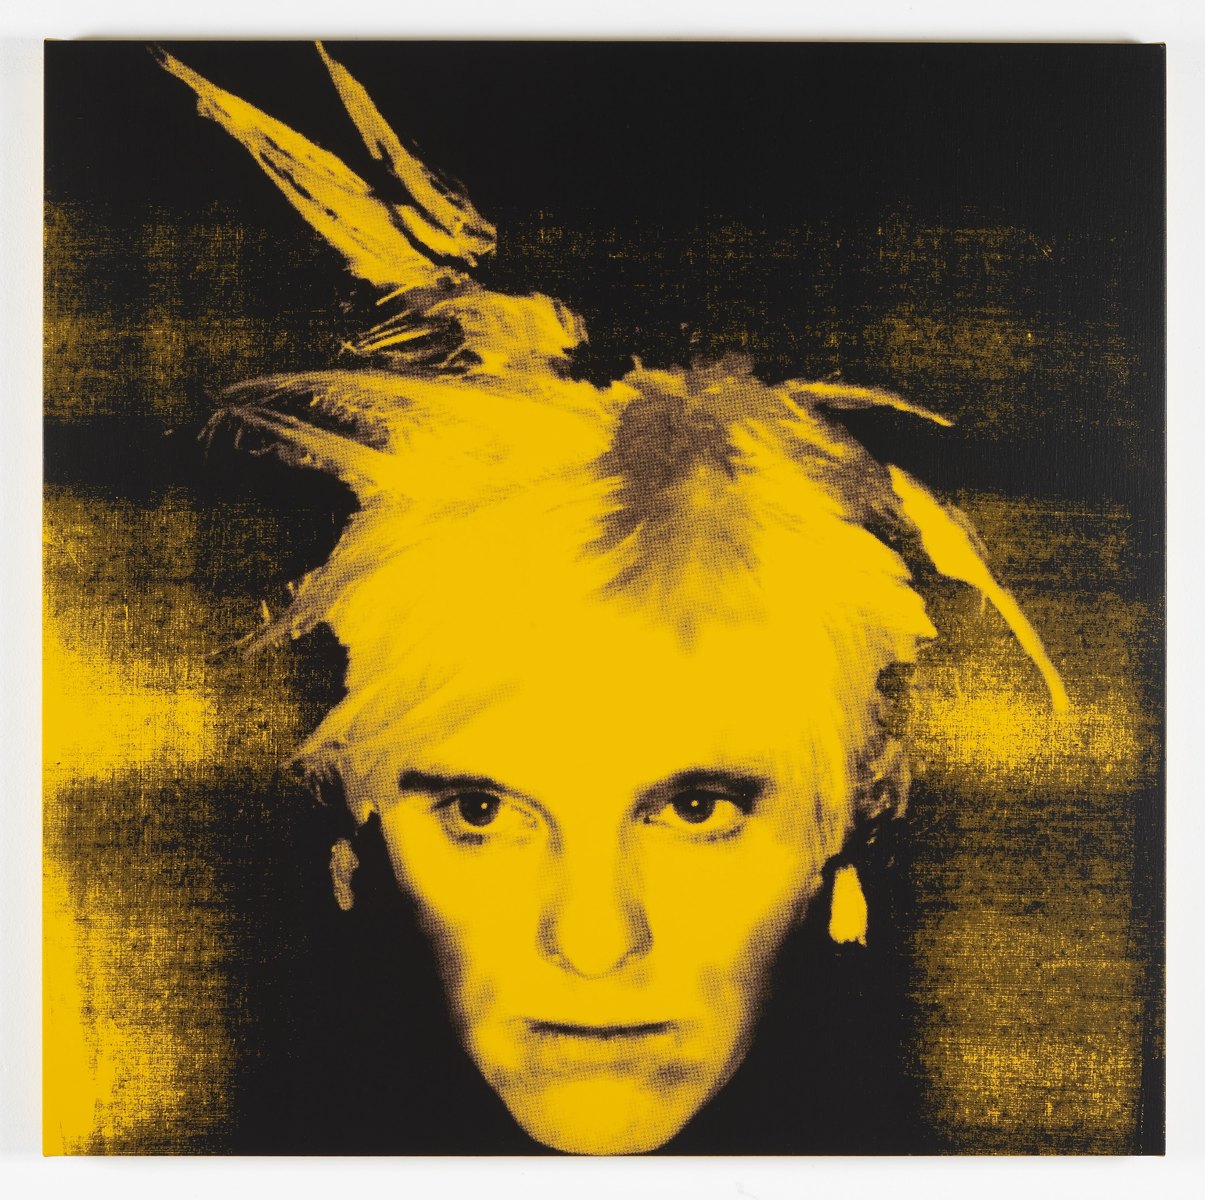 A yellow image of a man's face (Gavin Turk, as Andy Warhol) on a black background